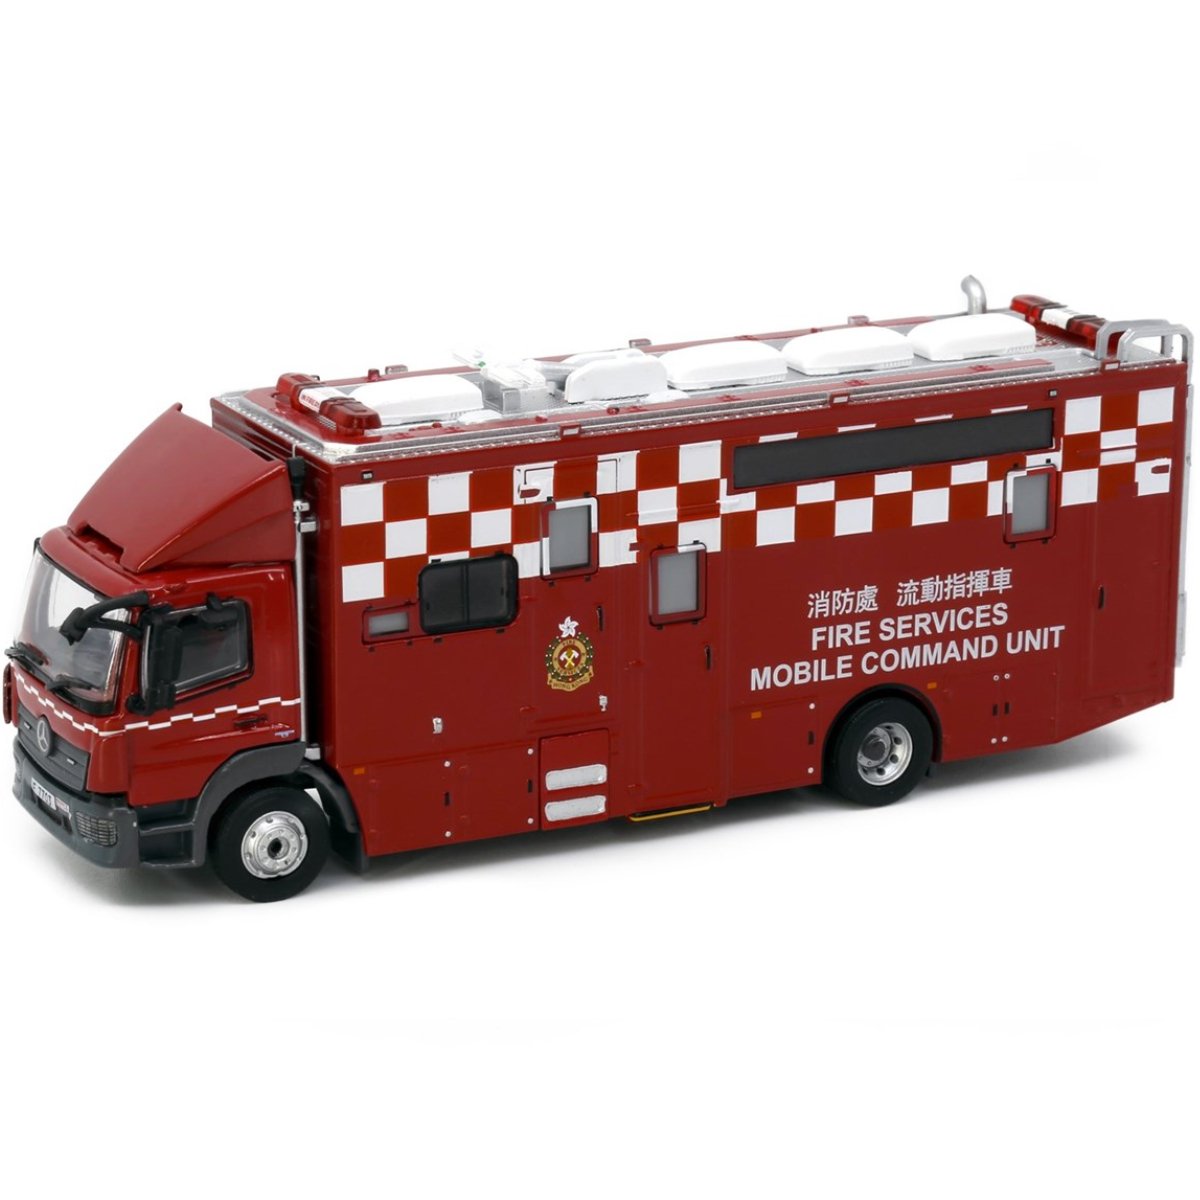 Tiny Models Mercedes-Benz Atego Fire Services Mobile Command Unit F7703 (1:76 Scale) - Phillips Hobbies